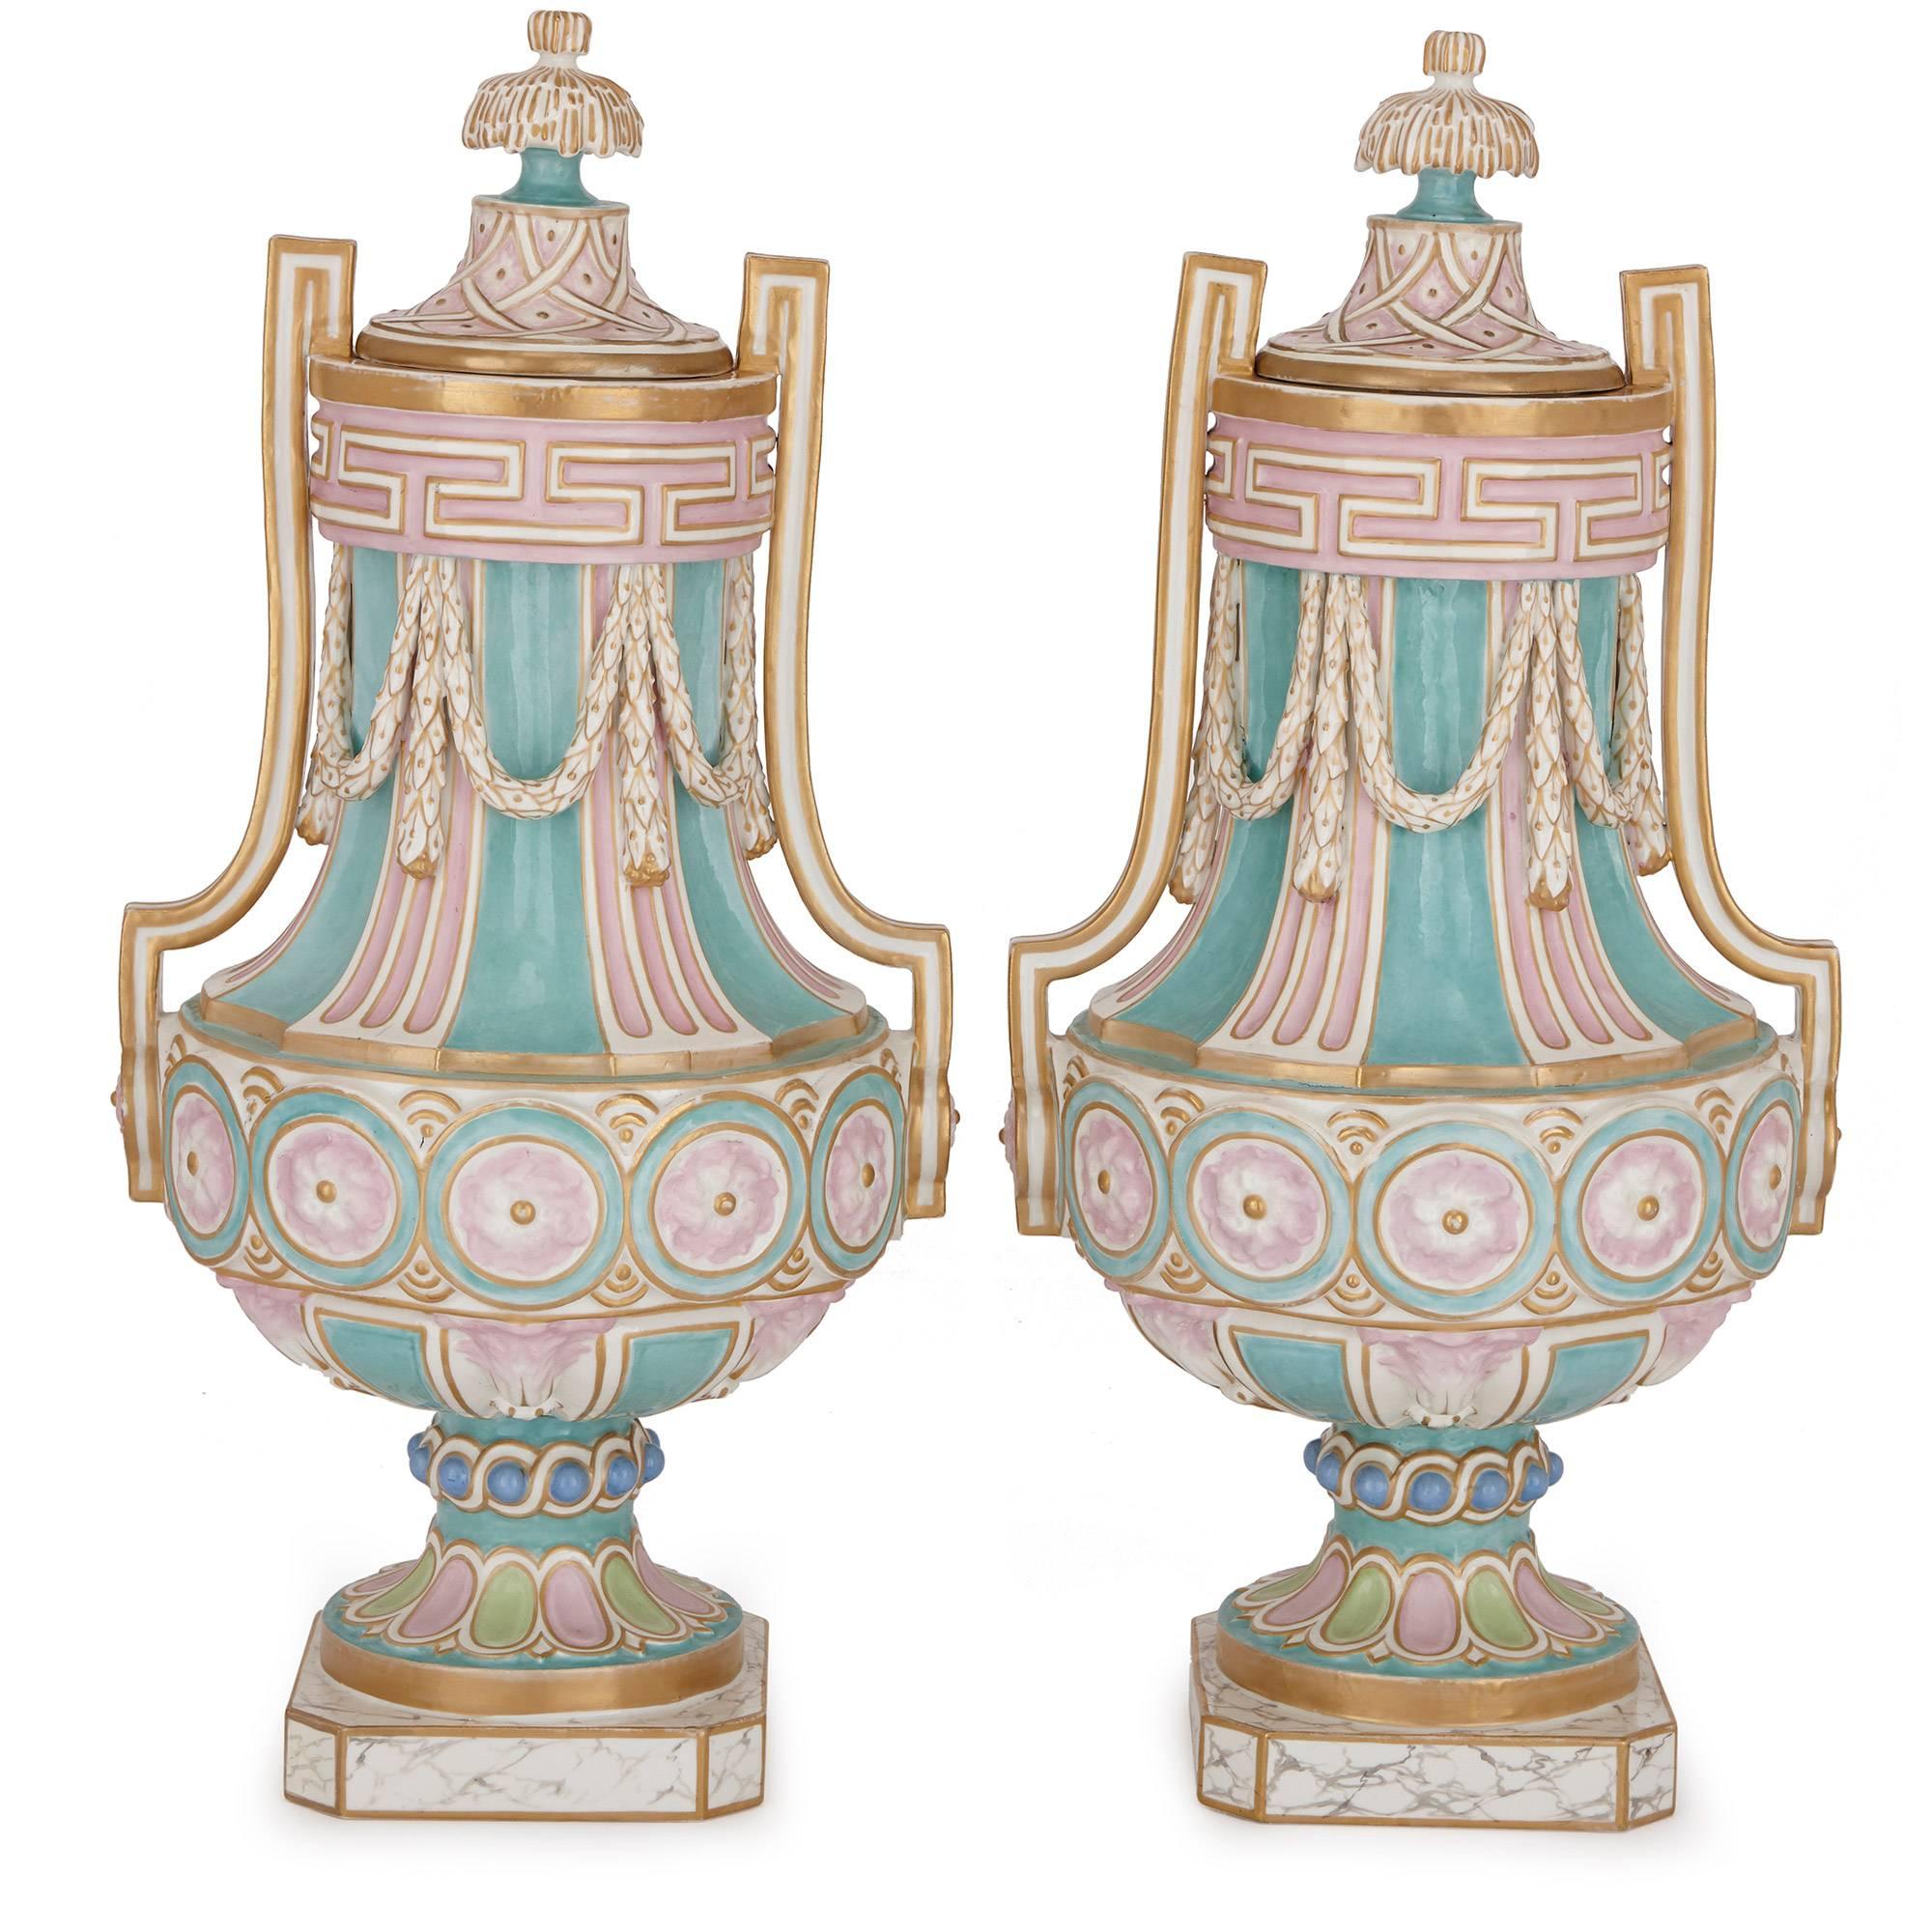 This pair of antique German porcelain vases are designed with Neoclassical features and elegantly decorated in pastel colors. Each vase is surmounted with a lid and features twin handles at the sides, which are joined by white porcelain garlands